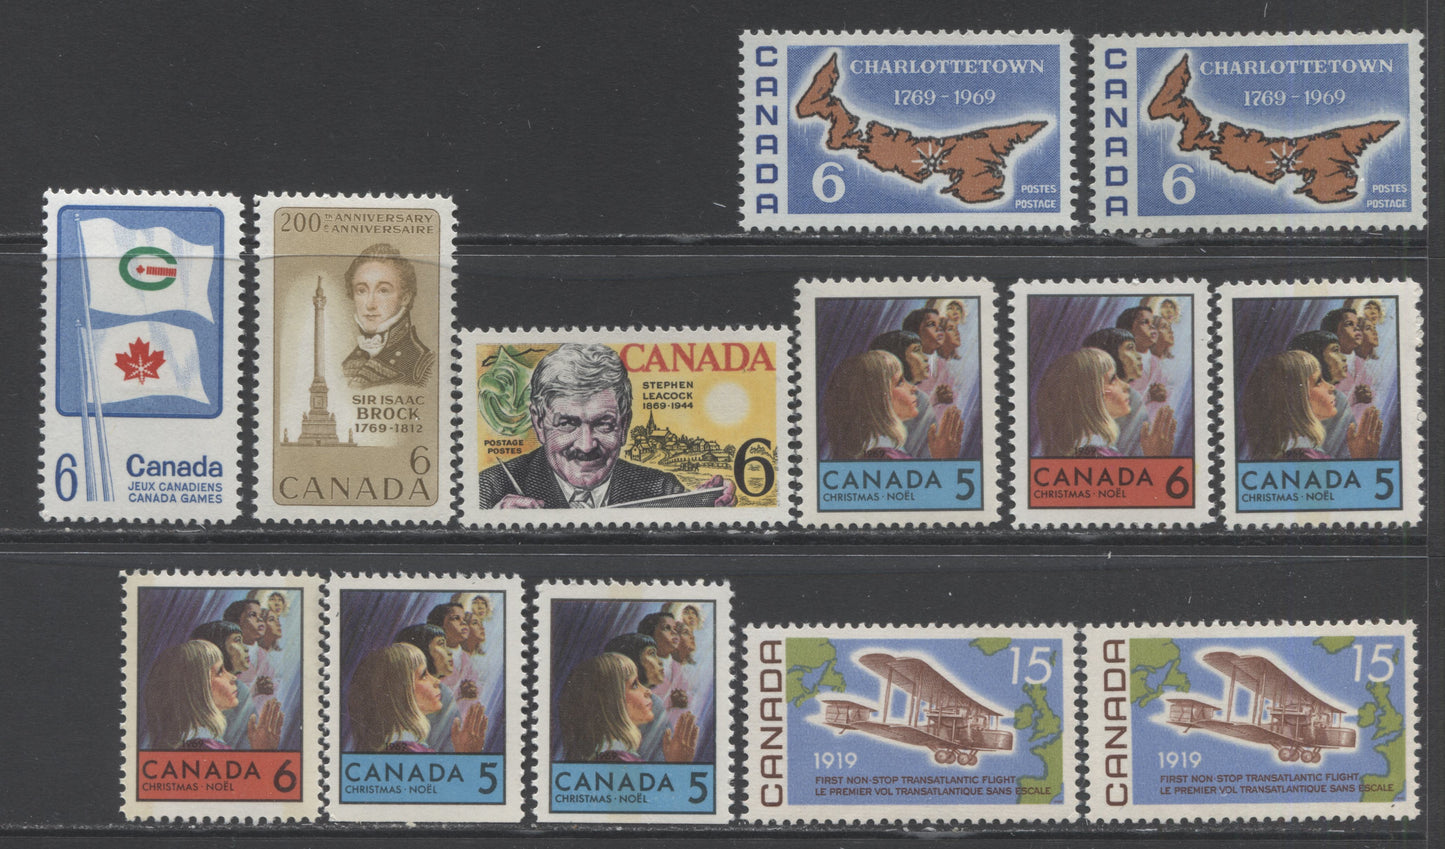 Lot 401 Canada #490-504 5c-50c Blue - Multicolored Various Subjects, 1969 Commemoratives, 26 VFNH Singles Including Most All Paper Varieties & Three Shades Of the Suzor Cote Issue